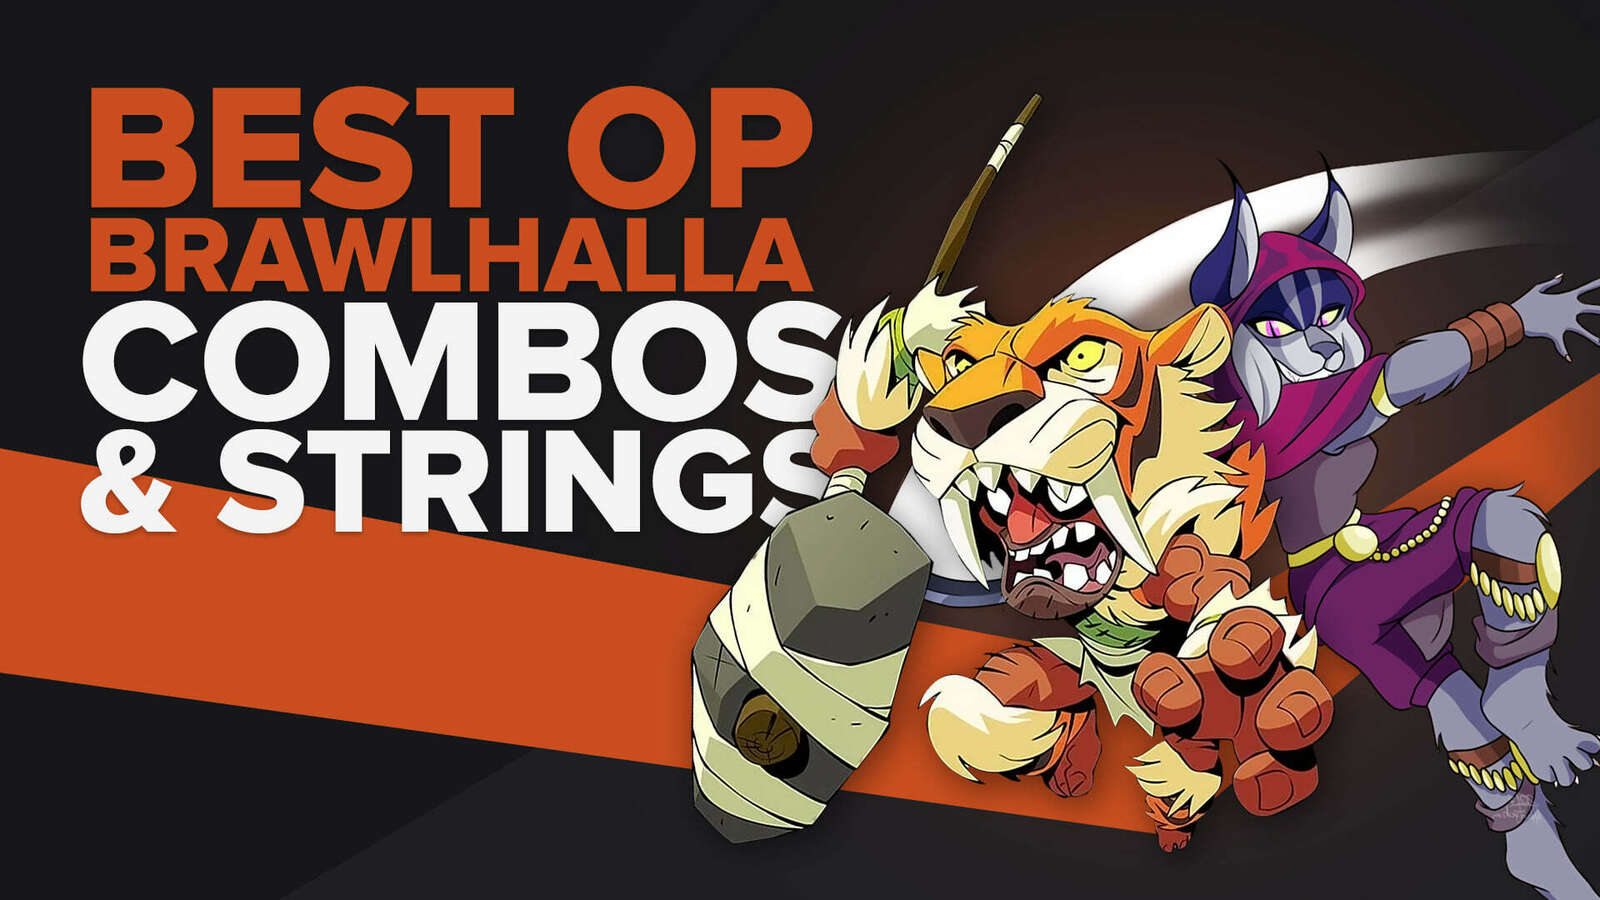 Best Combos and Strings In Brawlhalla that are OP (with Videos On How To Do Them)